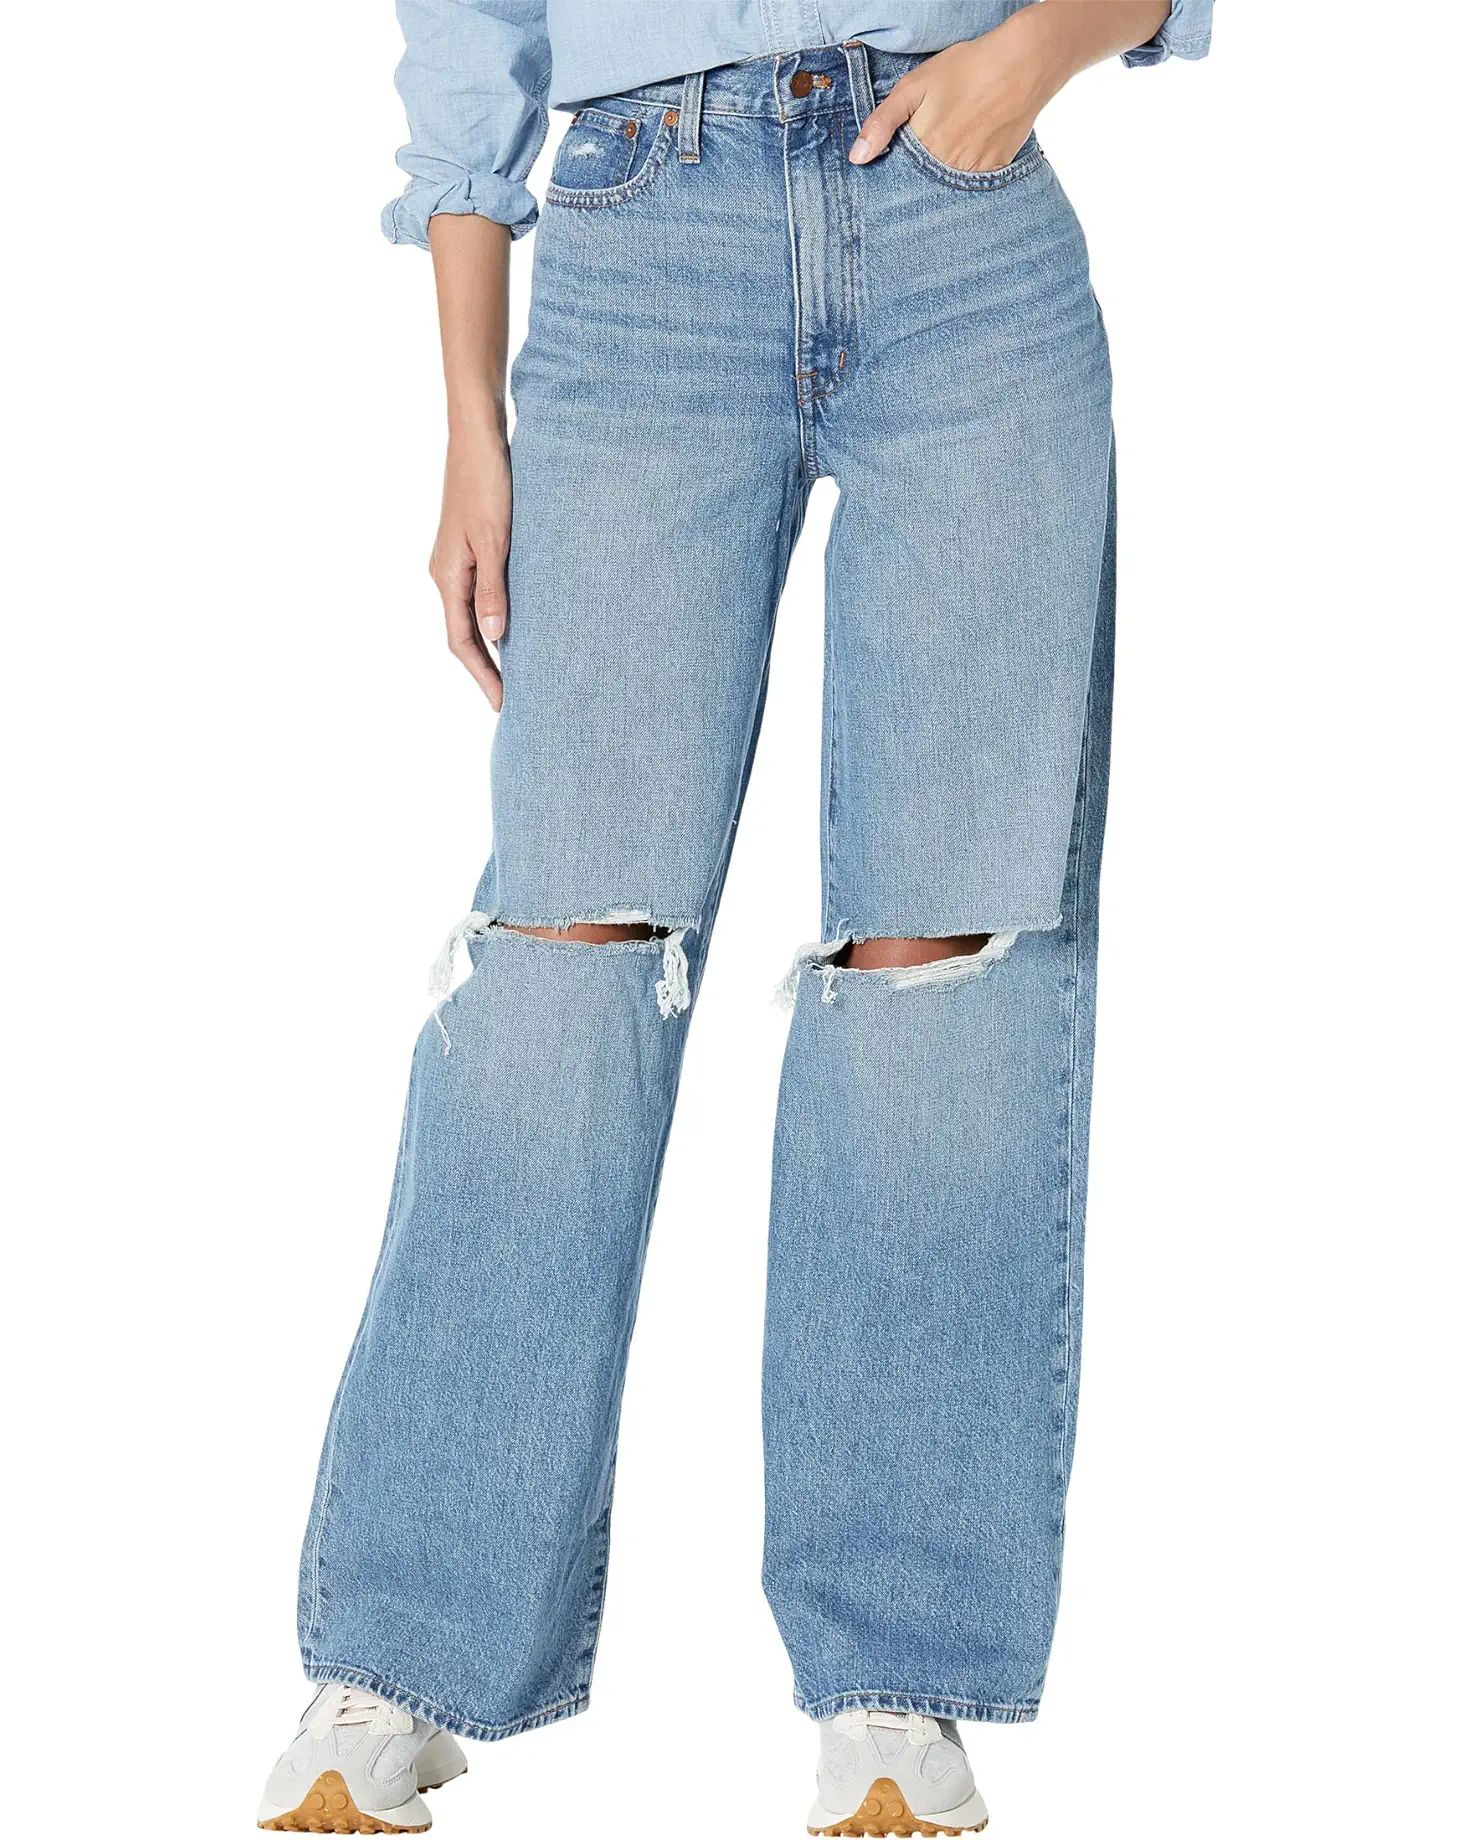 Madewell Superwide-Leg Jeans in Amcliffe Wash: Knee-Rip Edition | Zappos